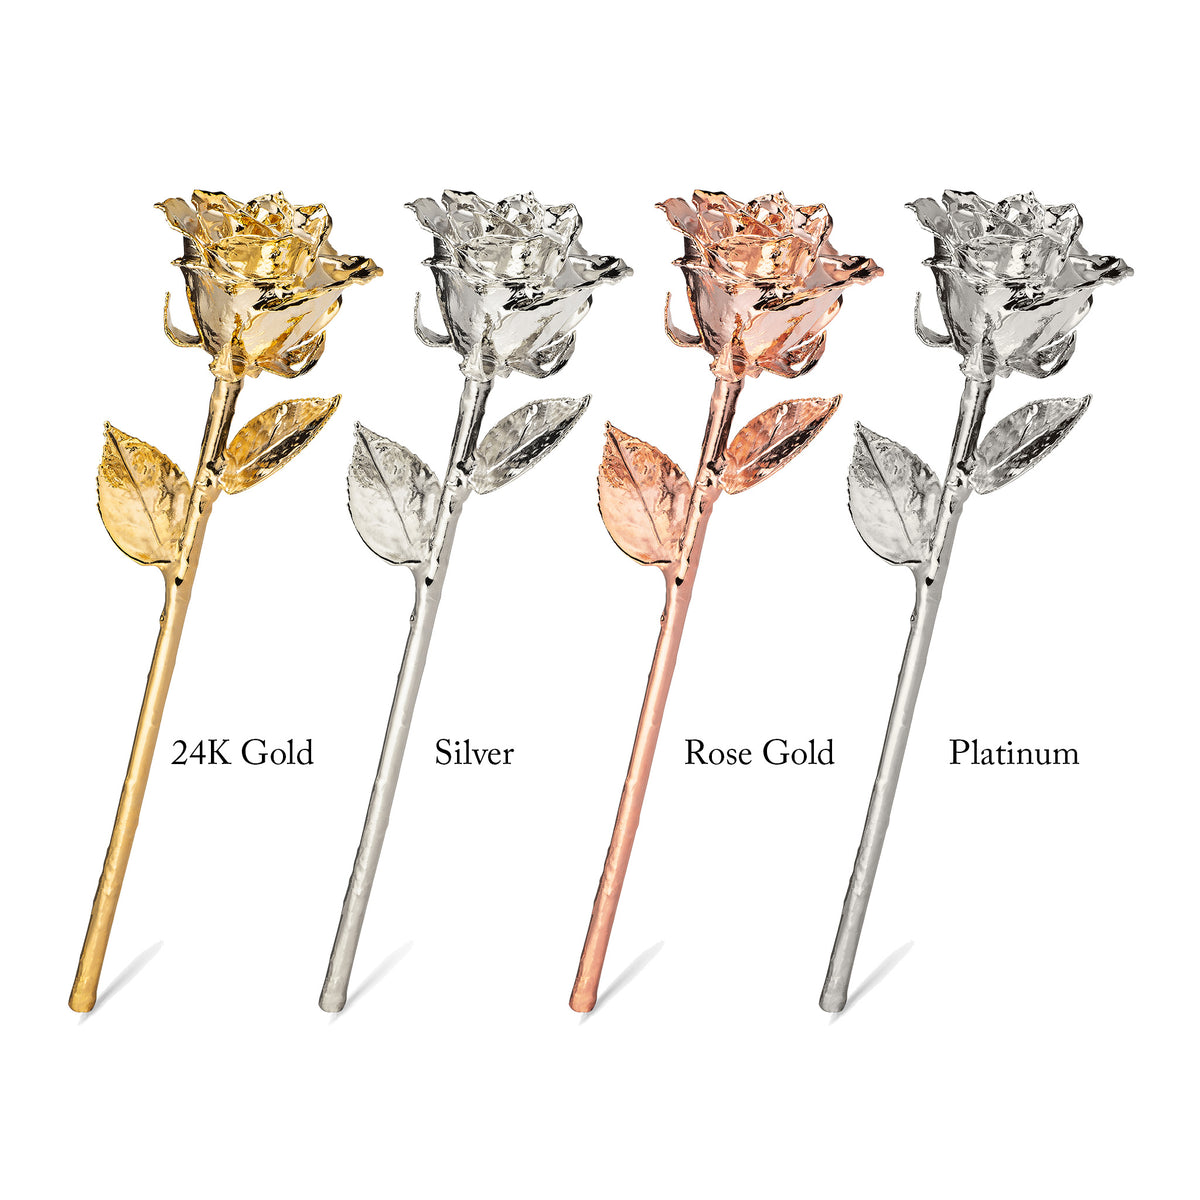 Forever Four Bouquet: Gold, Silver, Rose Gold, Platinum